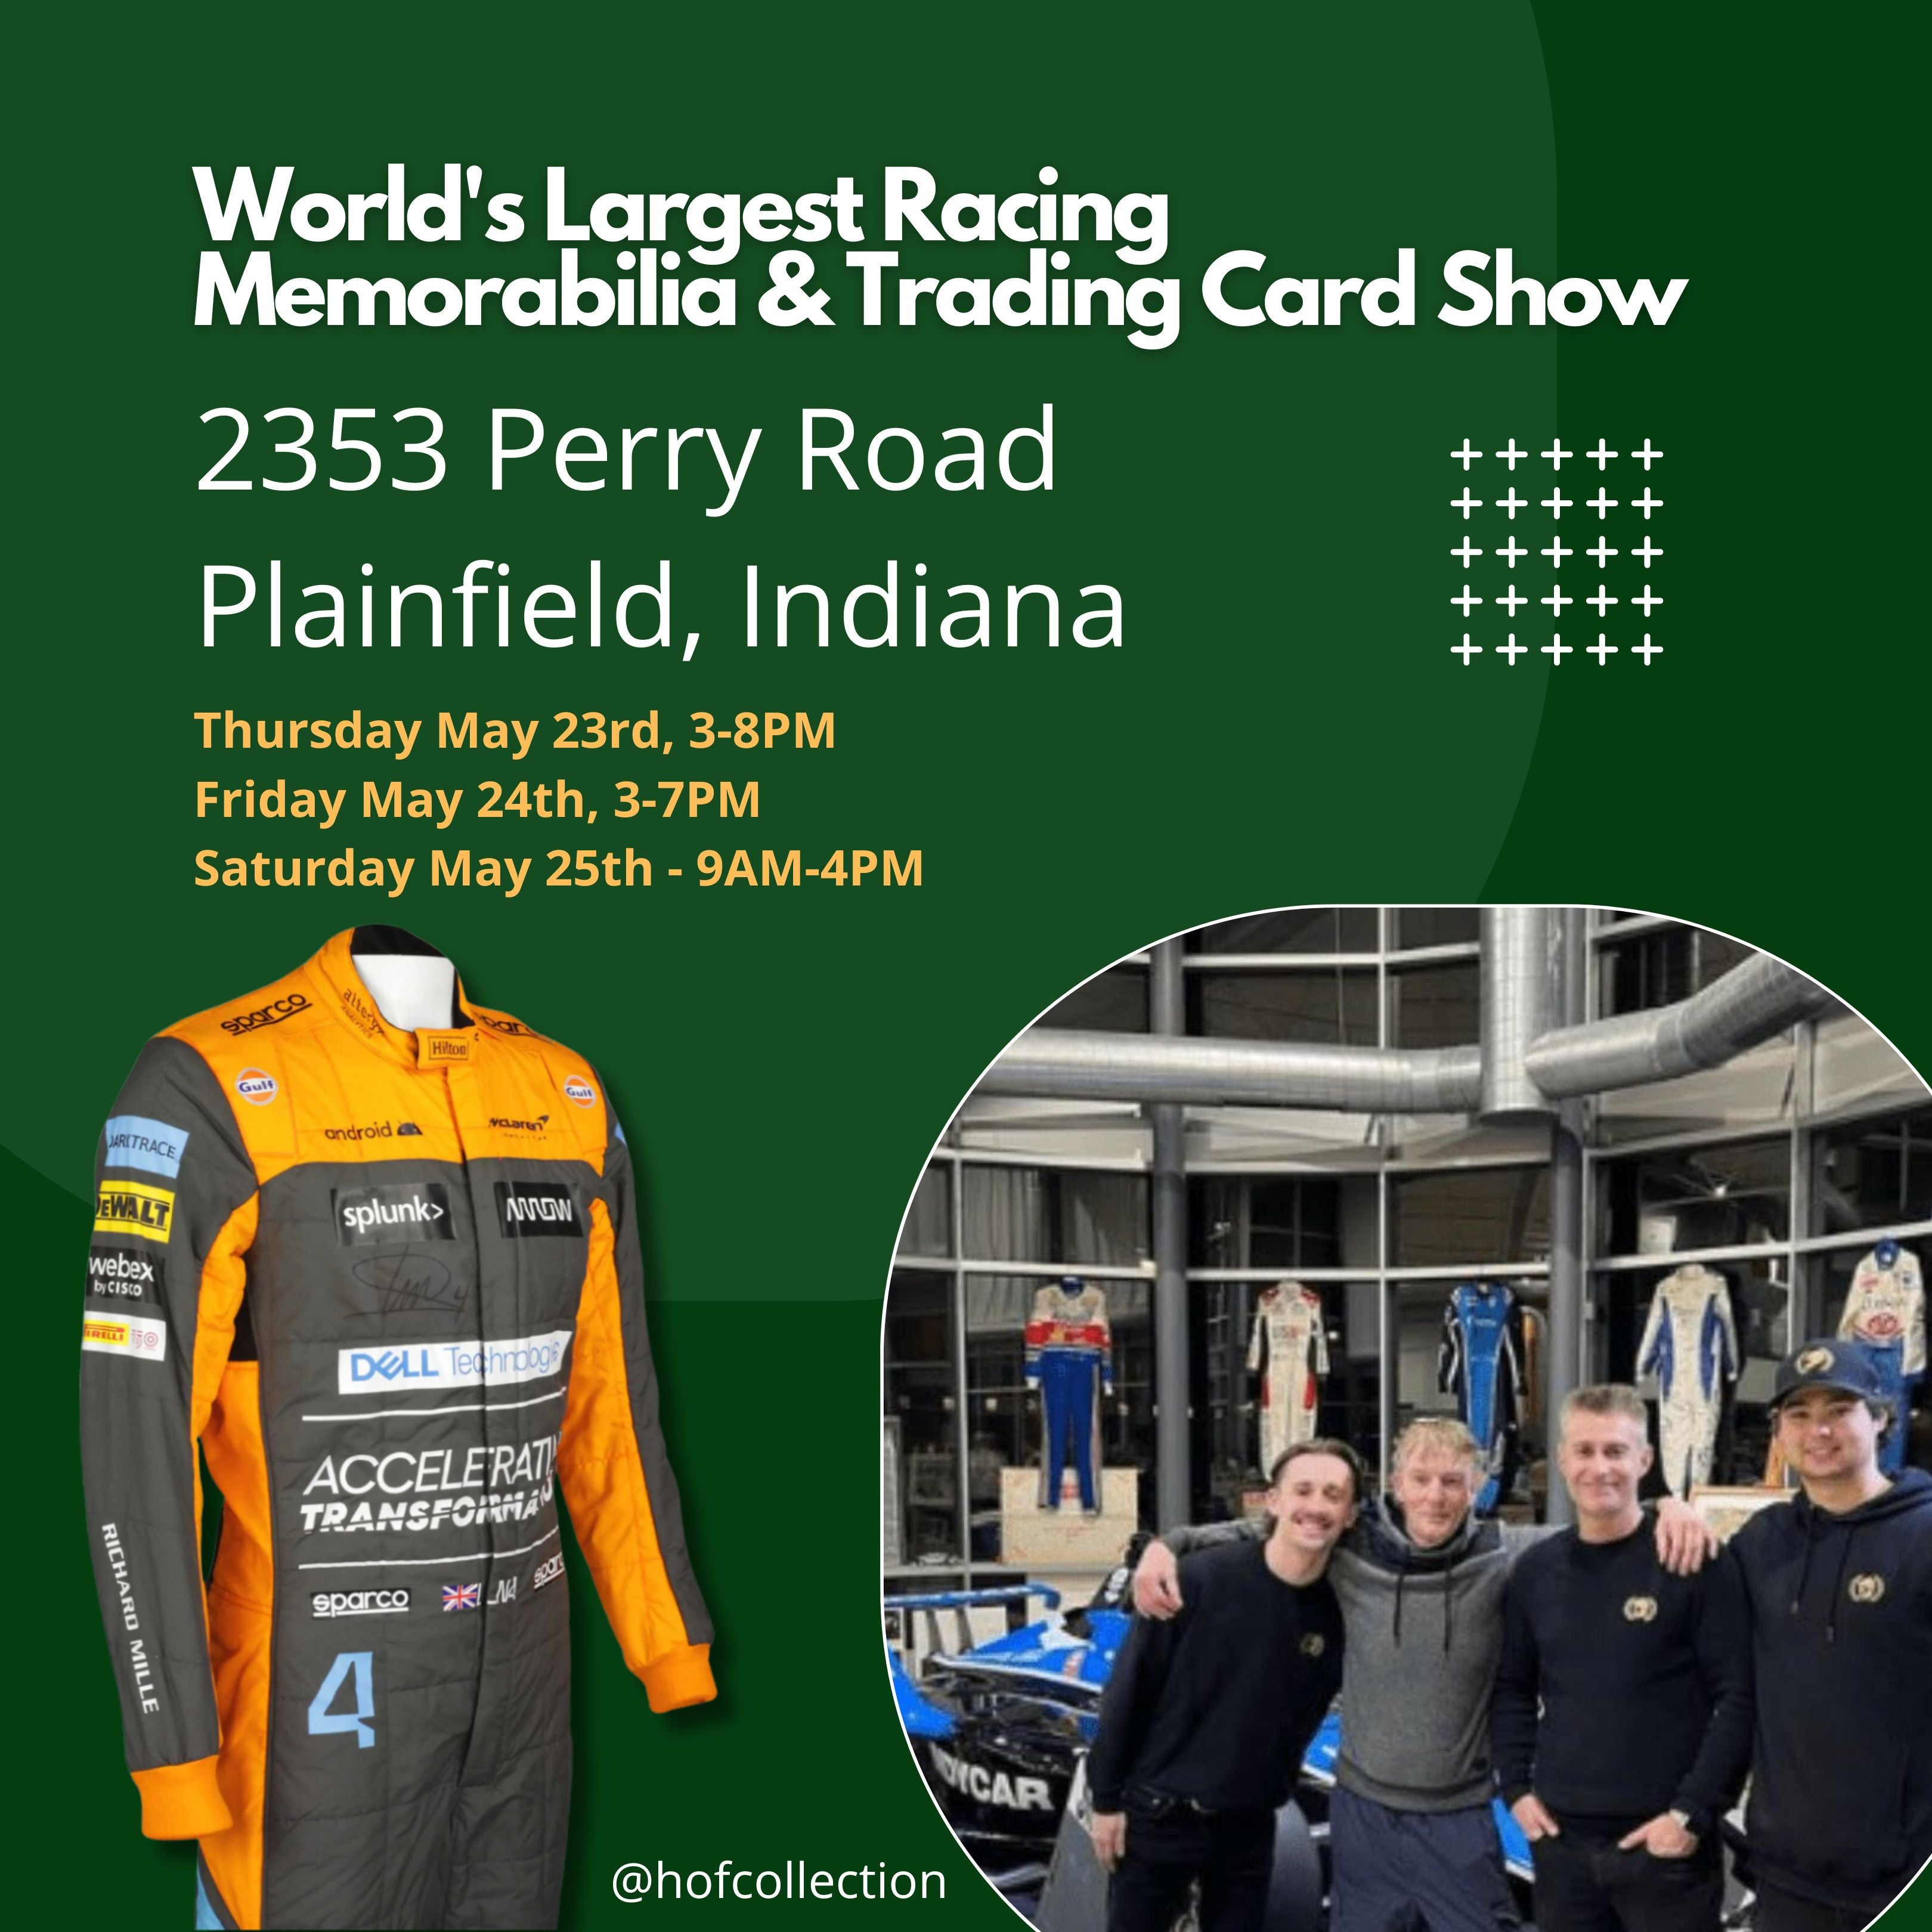 World's Largest Racing Memorabilia Show - THIS WEEKEND